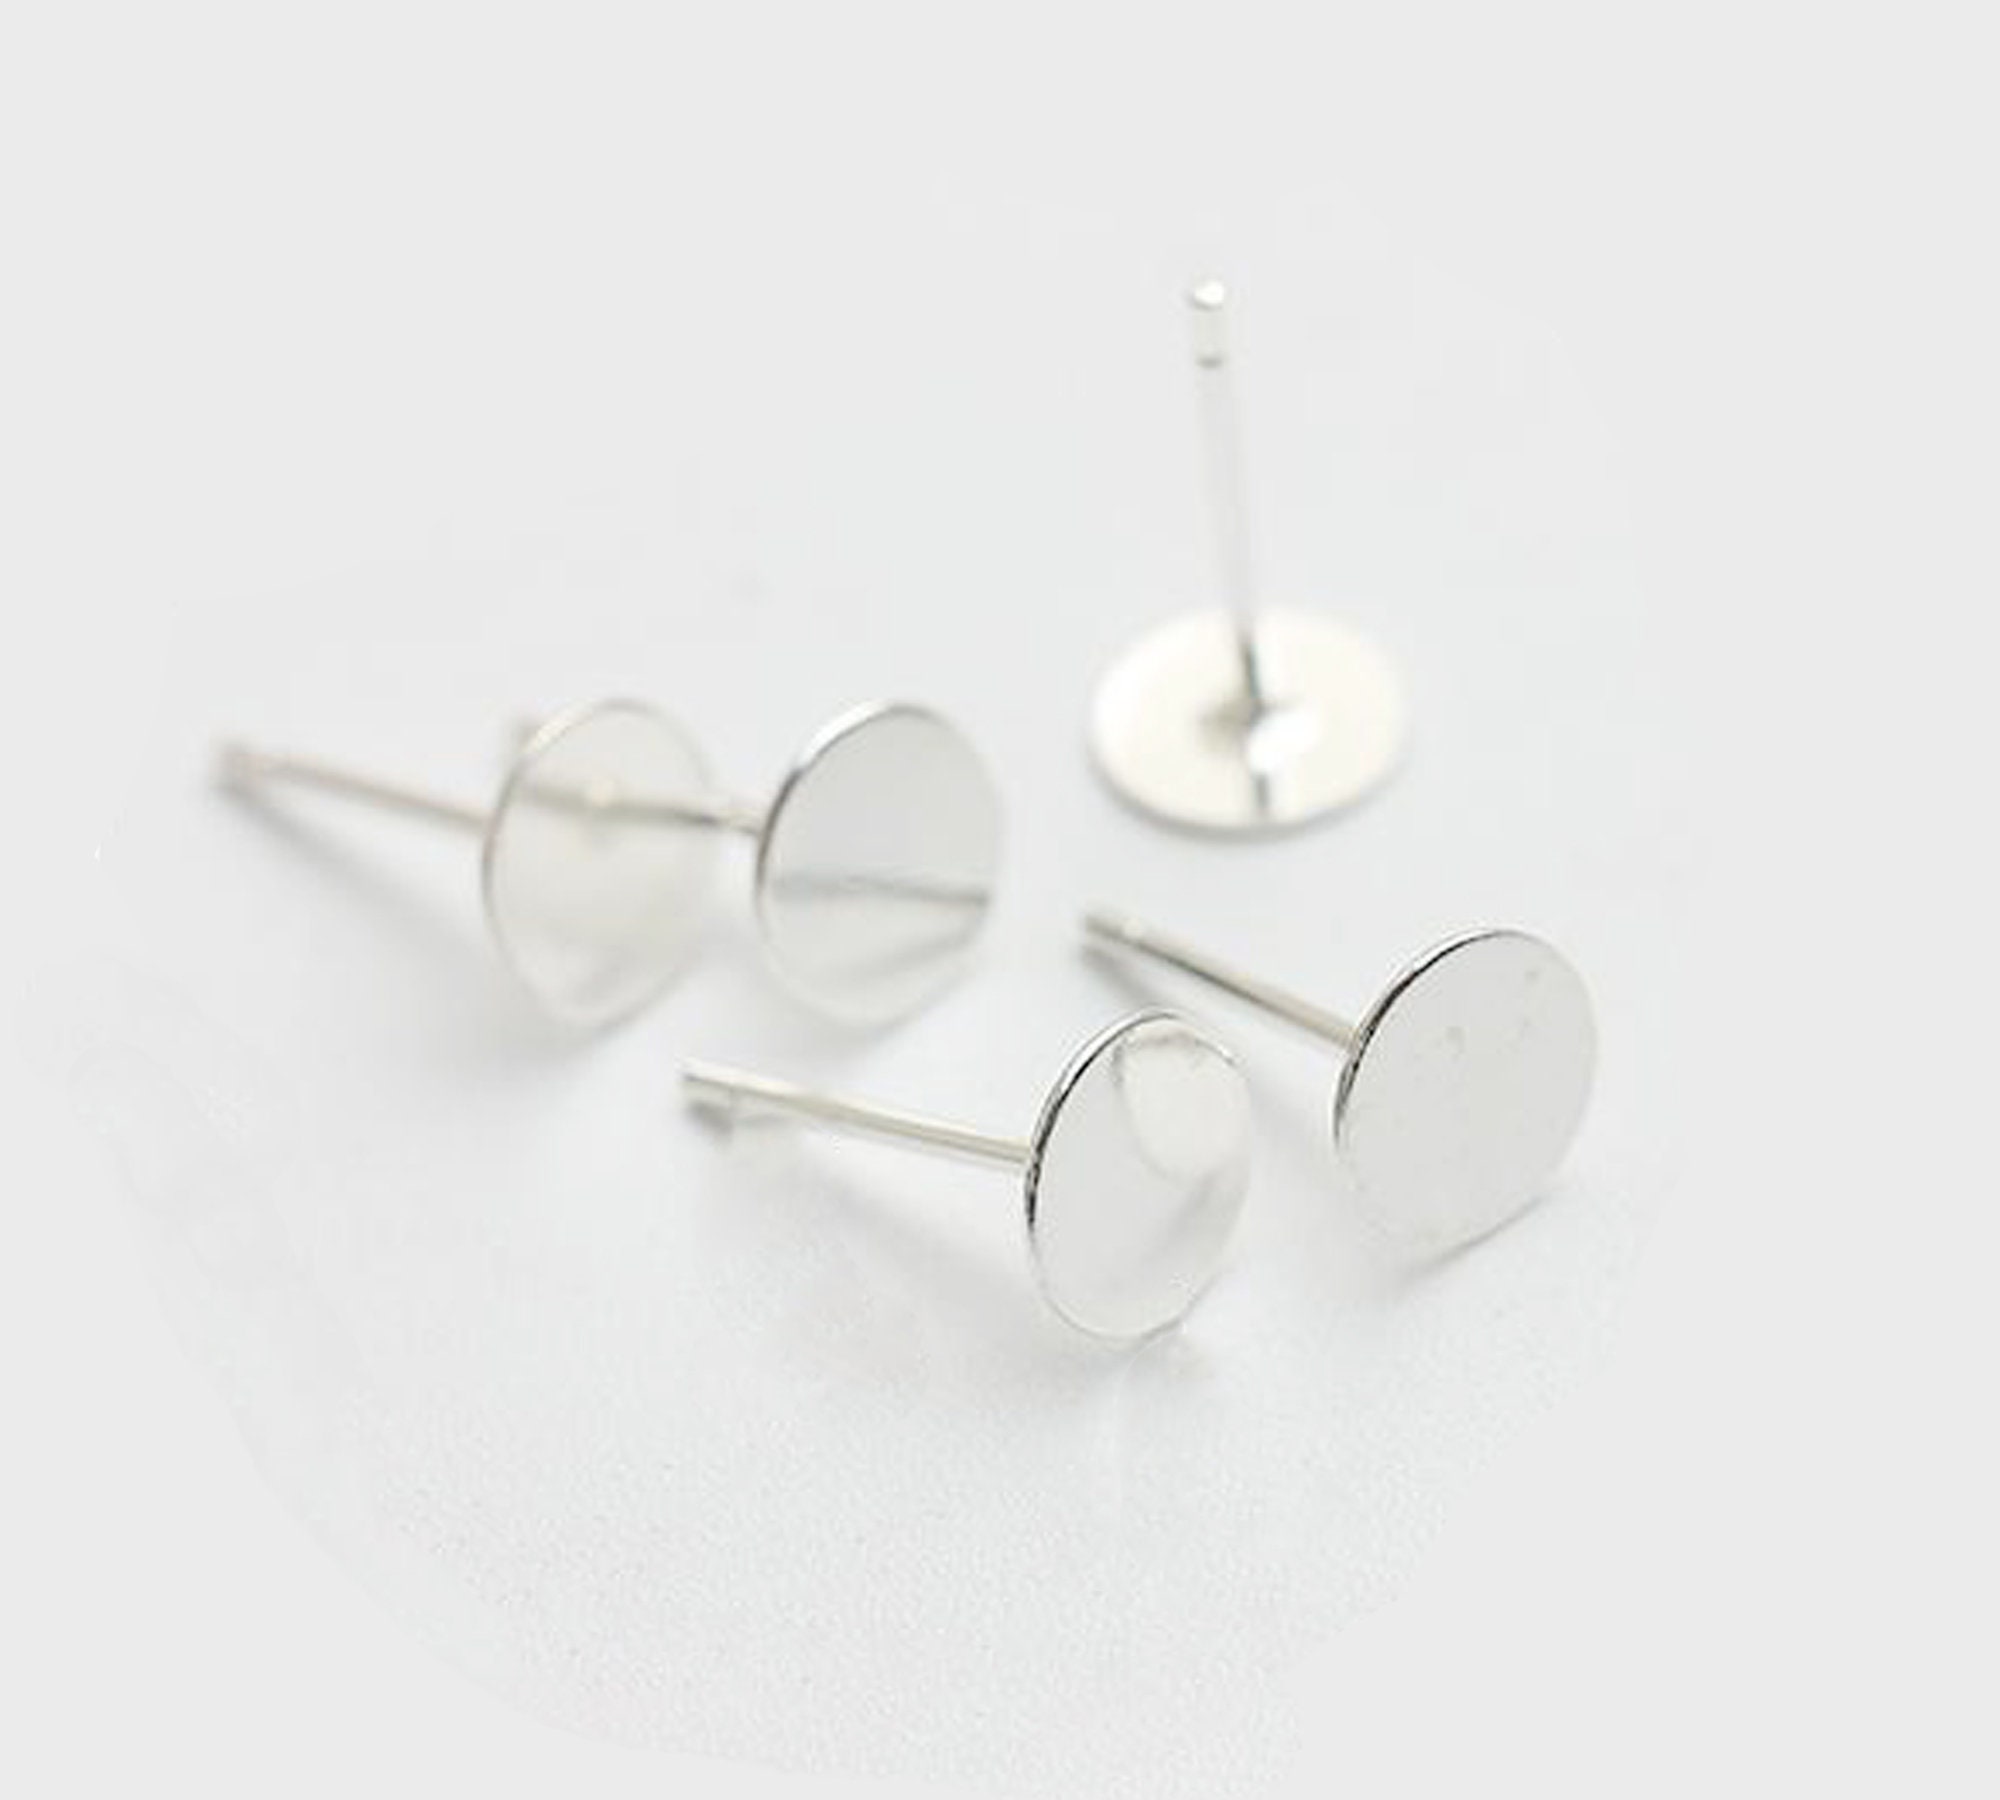 50PAIR 925 Sterling Silver Earring Posts Earring Stud Cabochon - Etsy